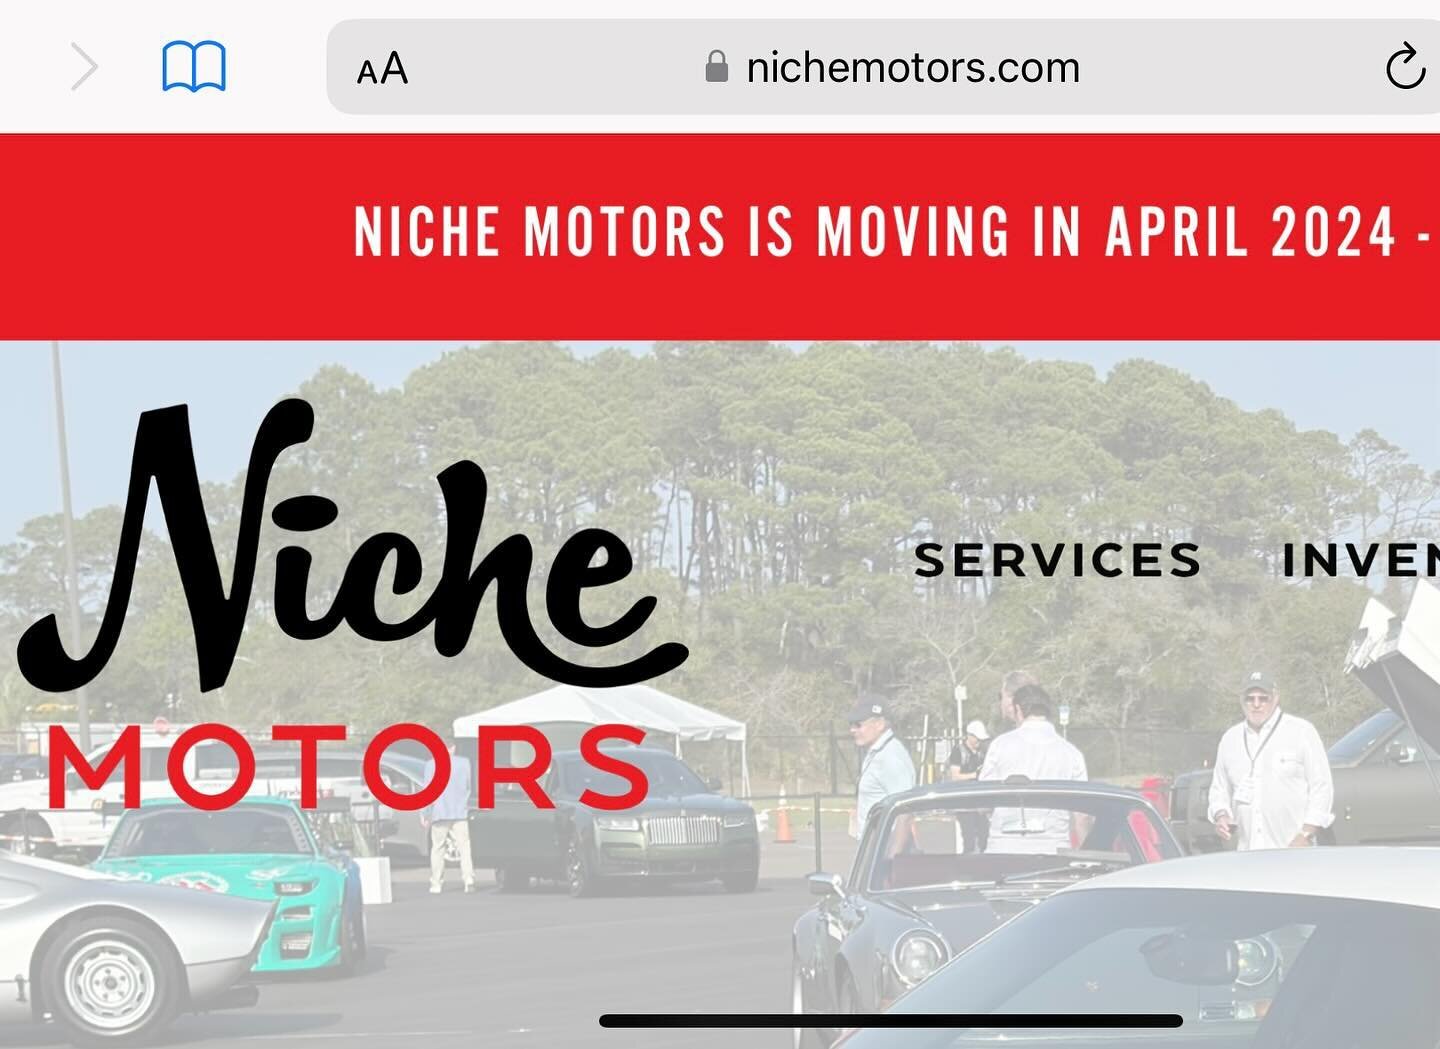 Big news on a small change! After 10 years we finally pulled the trigger on Nichemotors.com NO MORE HYPHEN! For the last decade it has been Niche-Motors.com&hellip;&hellip;what a difference &ldquo;no hyphen&rdquo; makes. Don&rsquo;t worry though, we 